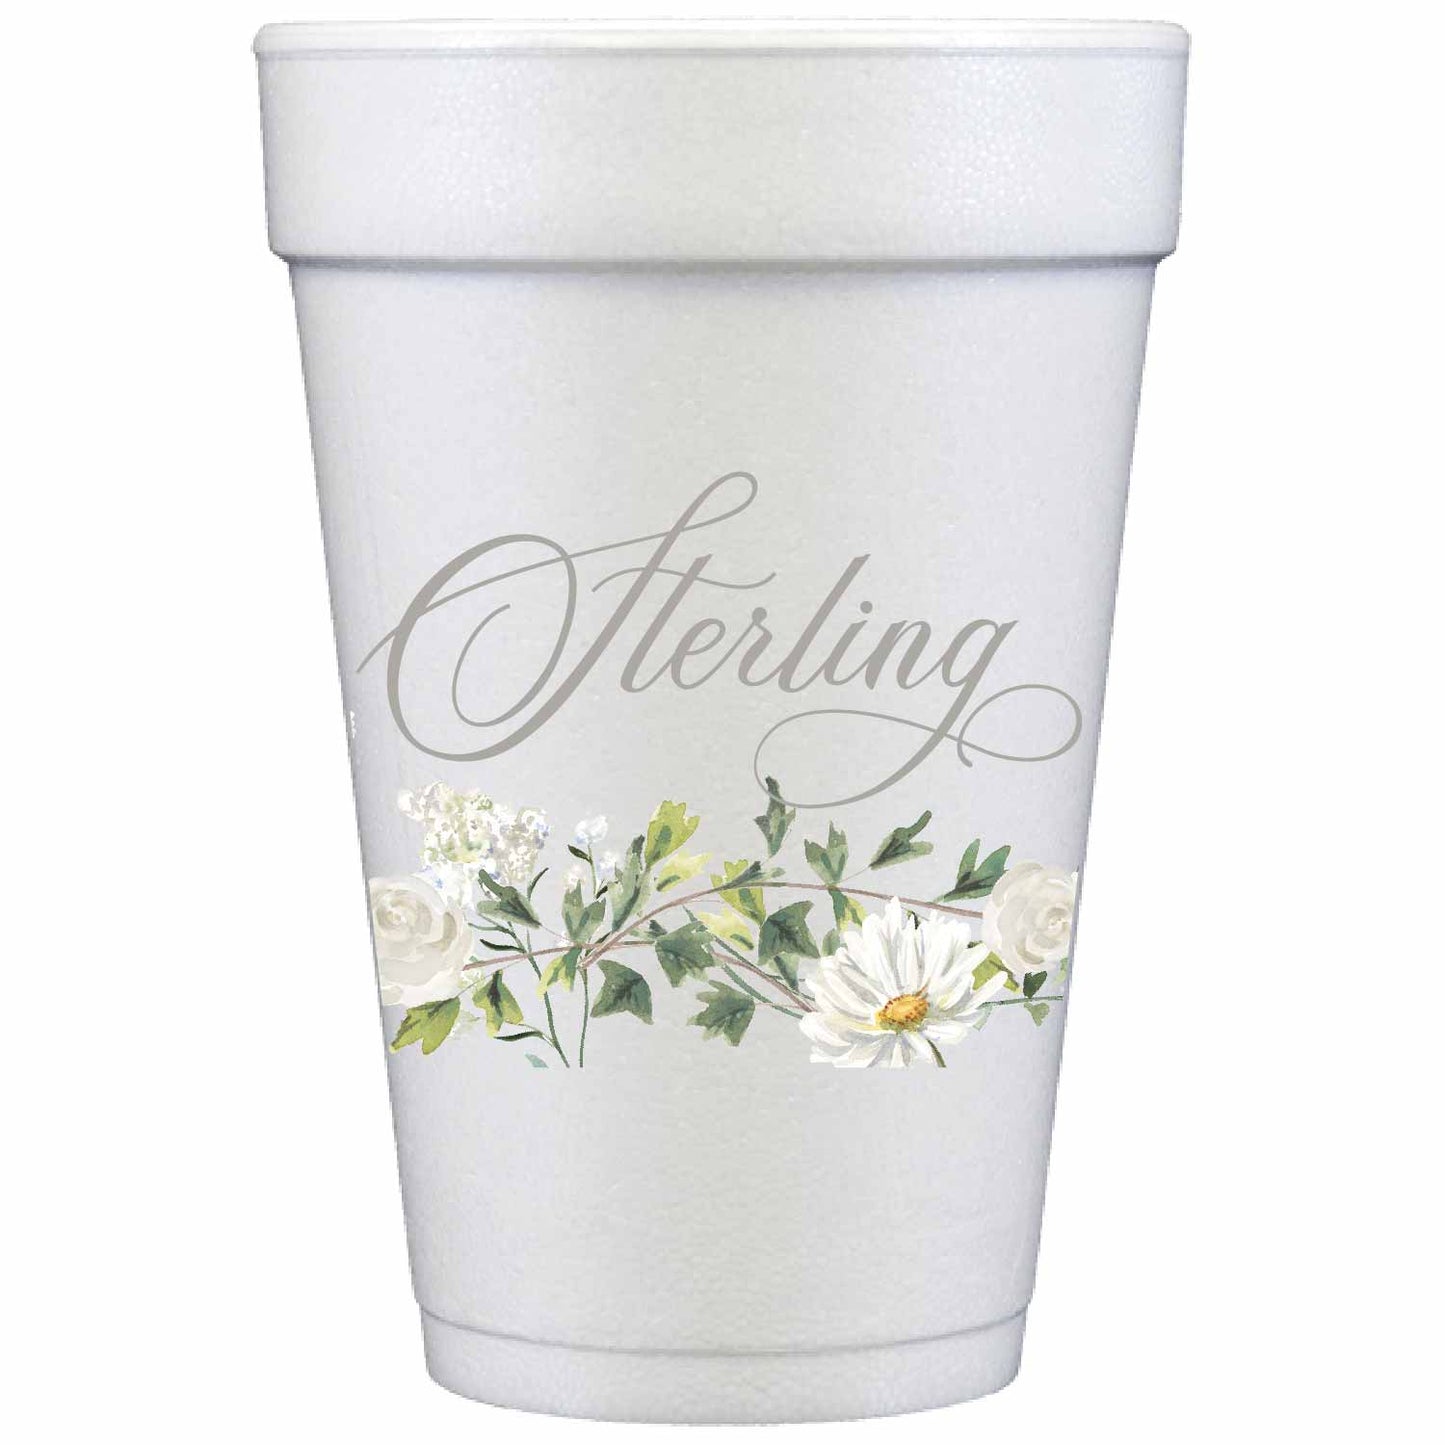 green and white personalized styrofoam cup